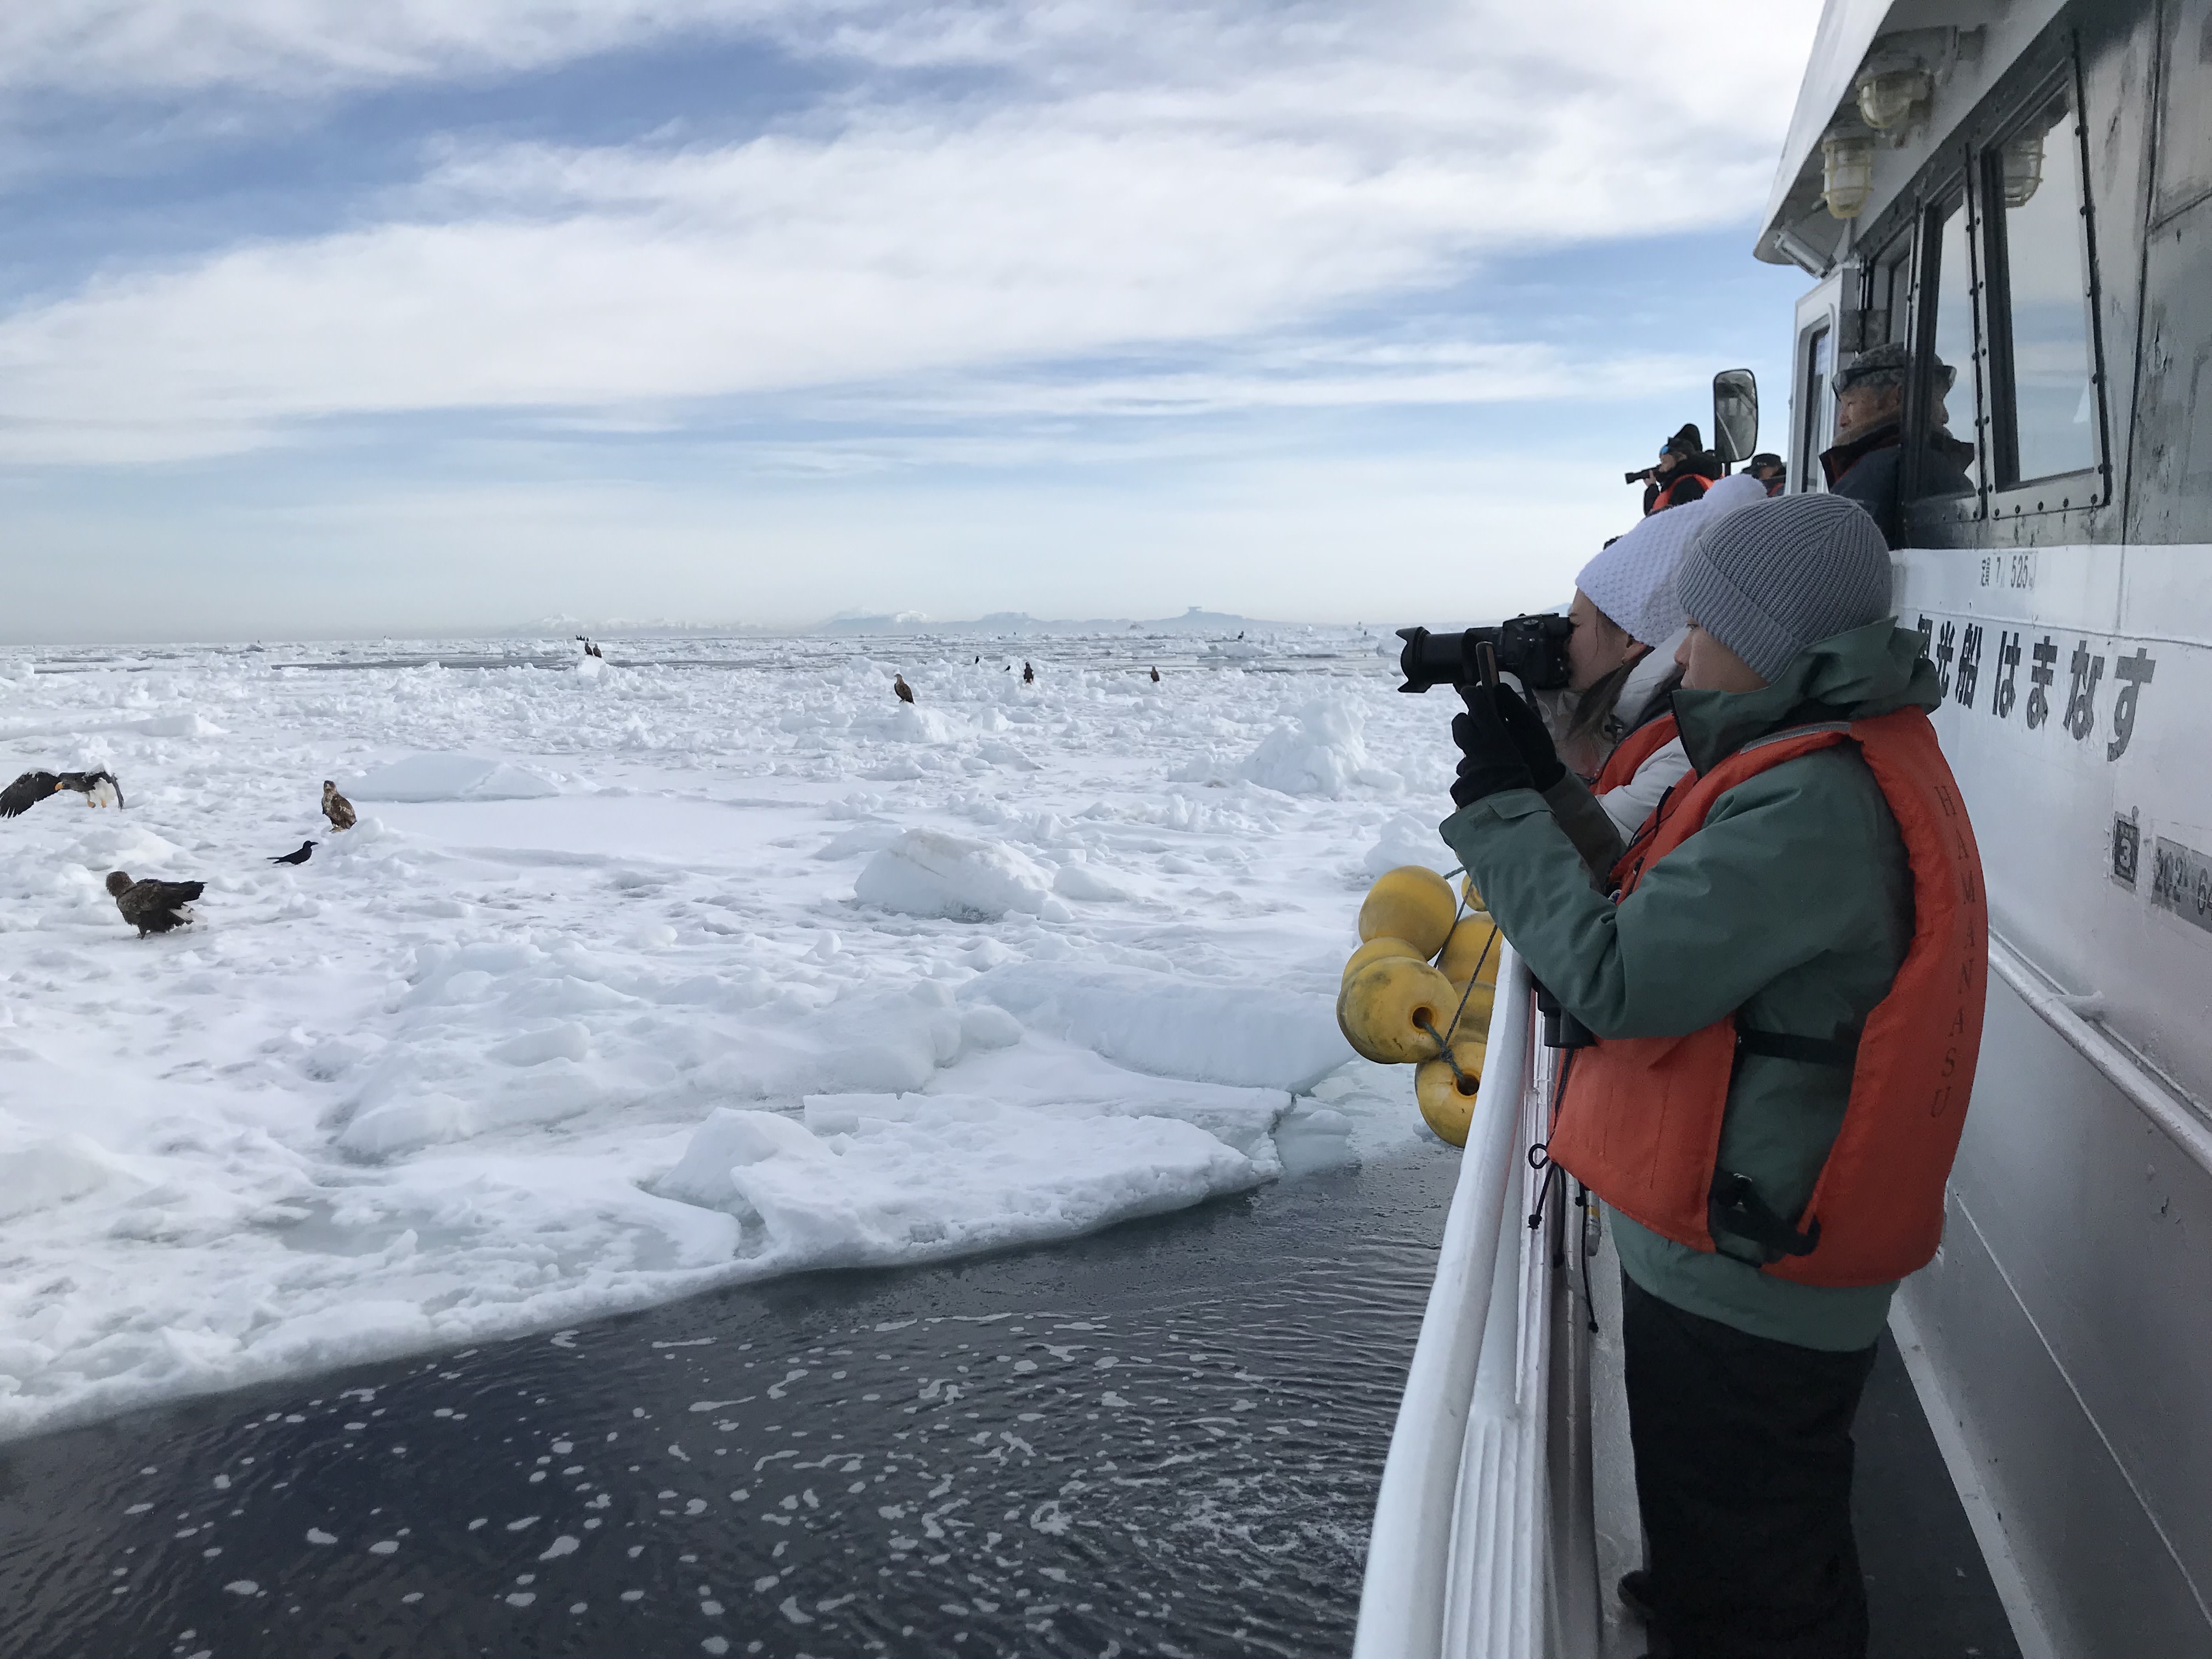 Guests aboard a boat take pictures of Steller's Sea Eagles on the drift ice.